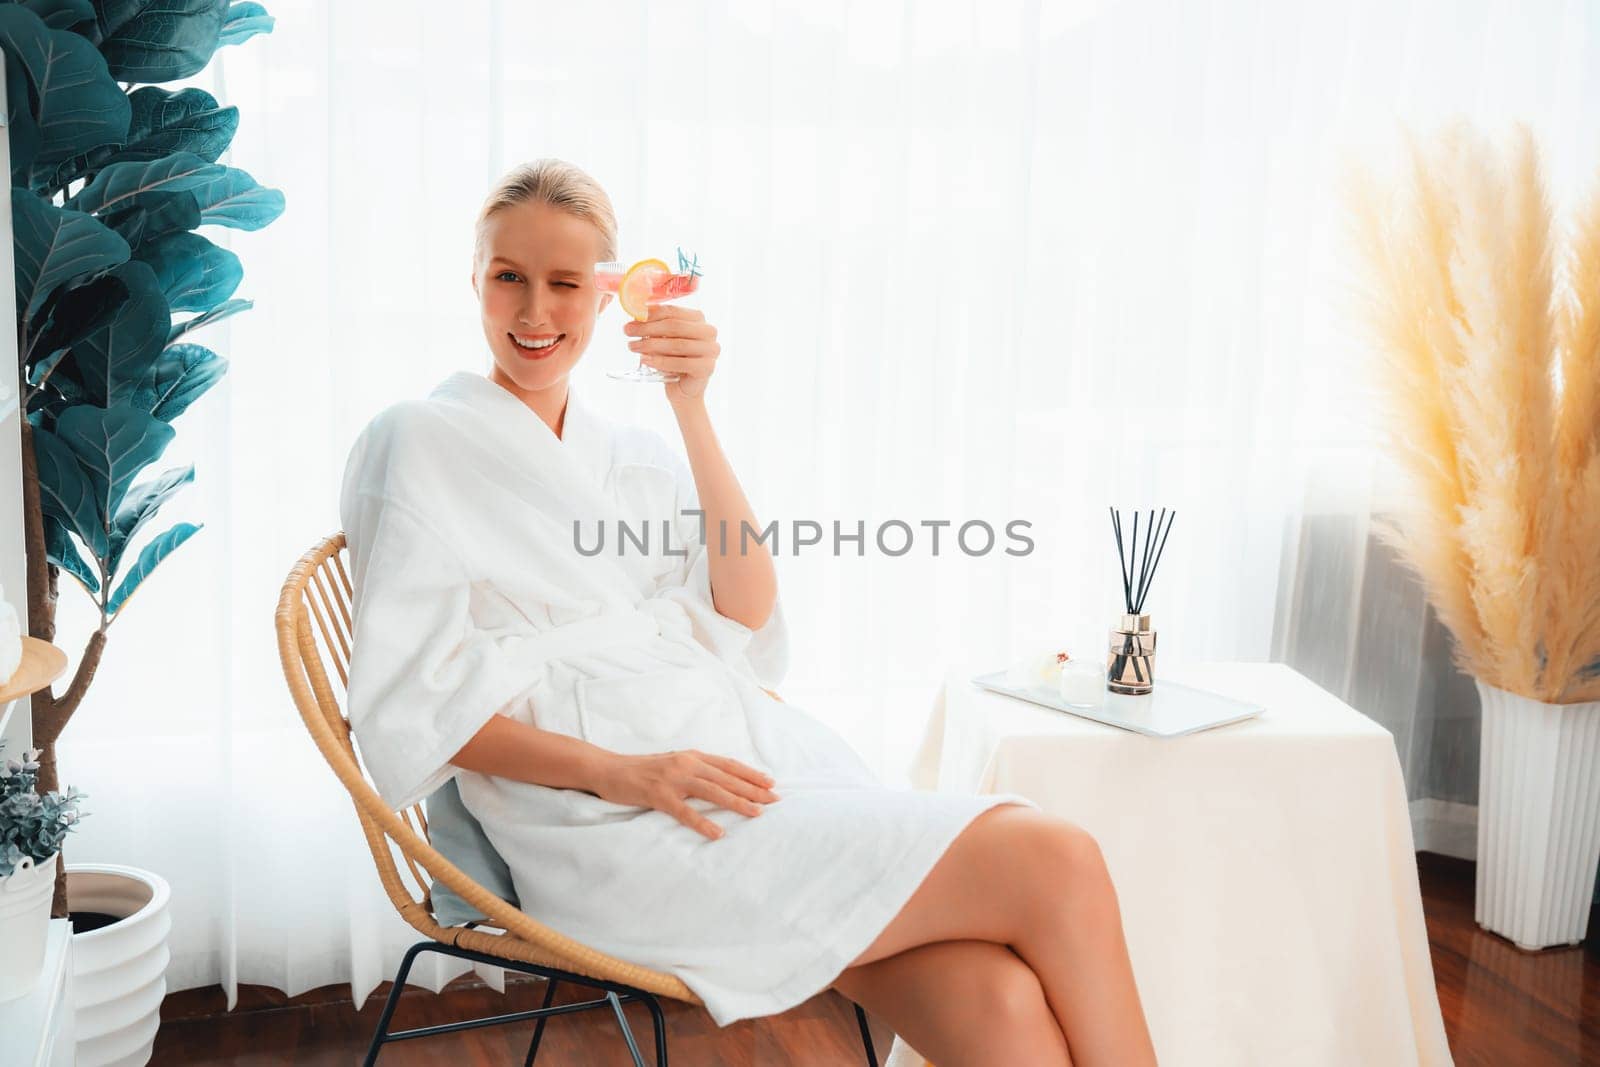 Beauty or body treatment spa salon vacation lifestyle concept with woman wearing bathrobe relaxing with drinks in luxurious hotel spa or resort room. Vacation and leisure relaxation. Quiescent